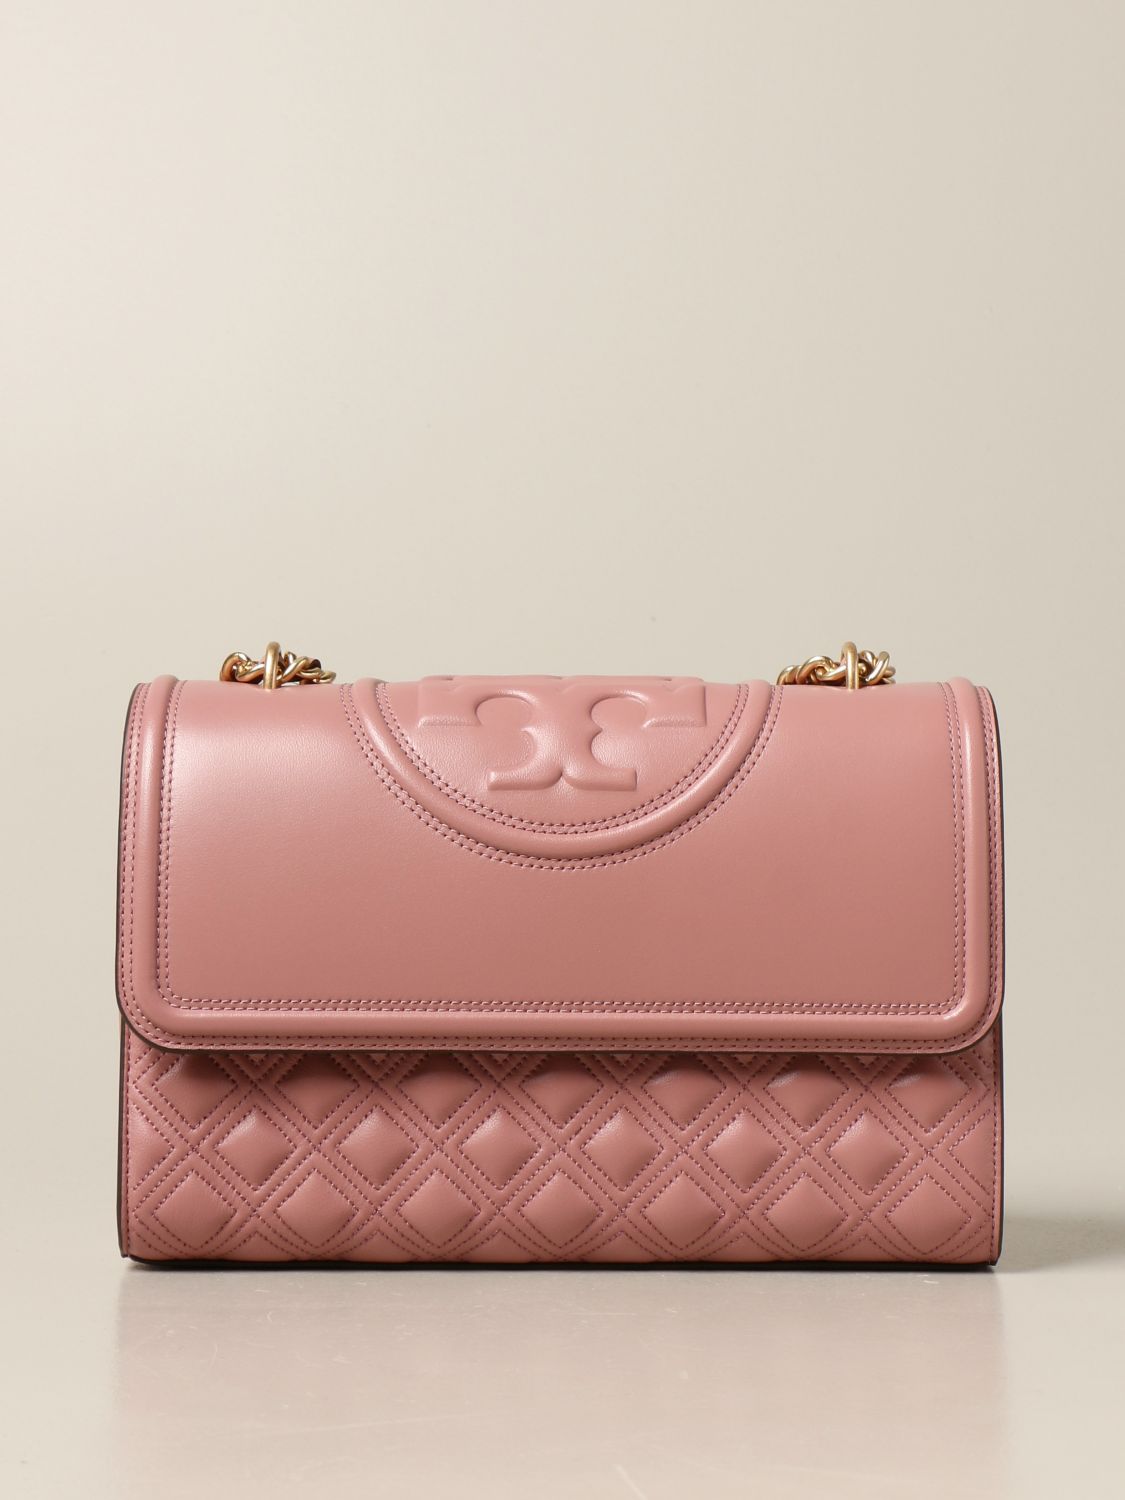 TORY BURCH: Fleming bag in quilted nappa - Pink  Tory Burch crossbody bags  76997 online at